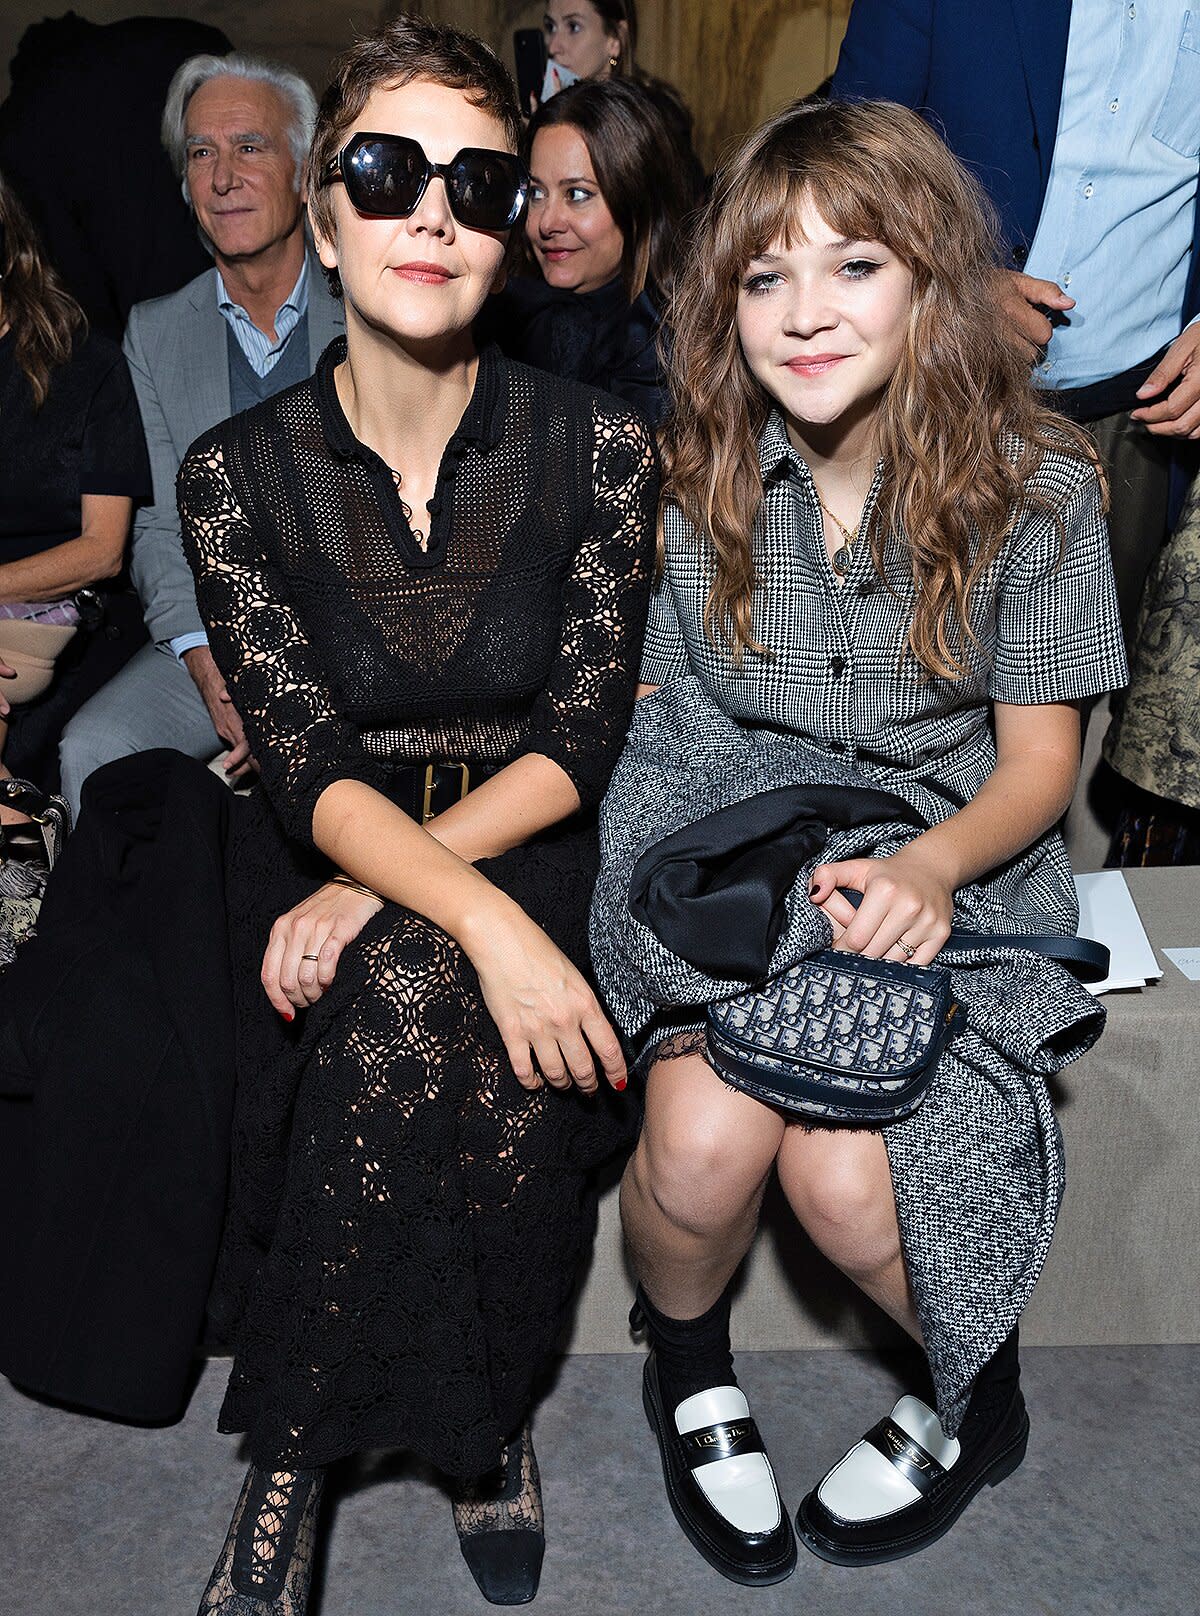 Maggie Gyllenhaal and Ramona Sarsgaard attend the Christian Dior Womenswear Spring/Summer 2023 show as part of Paris Fashion Week on September 27, 2022 in Paris, France.